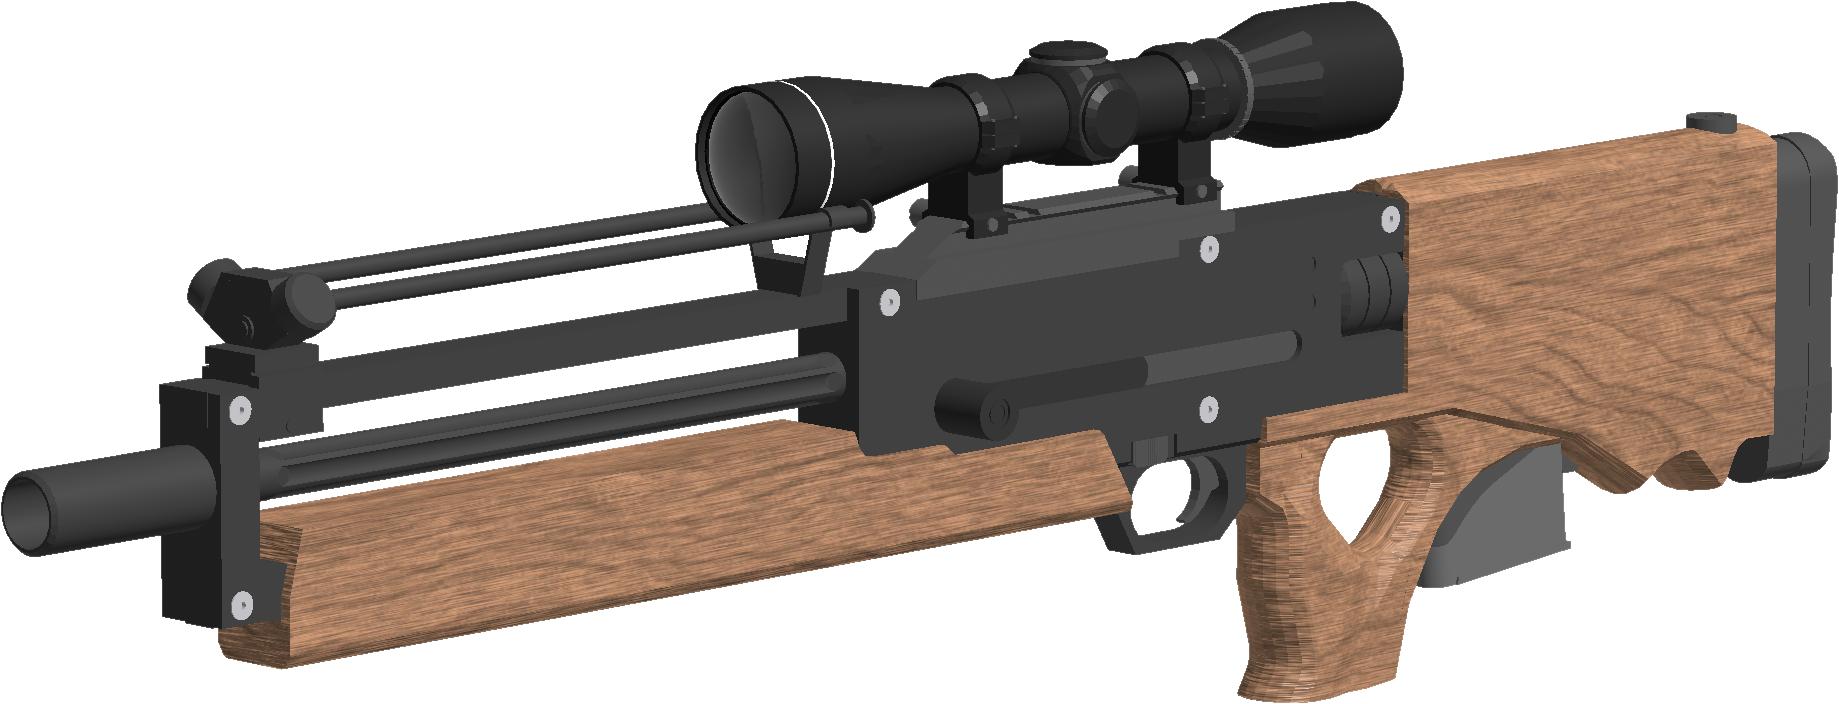 Wa2000 Phantom Forces Wiki Fandom - the best sniper in roblox phantom forces hecate ii